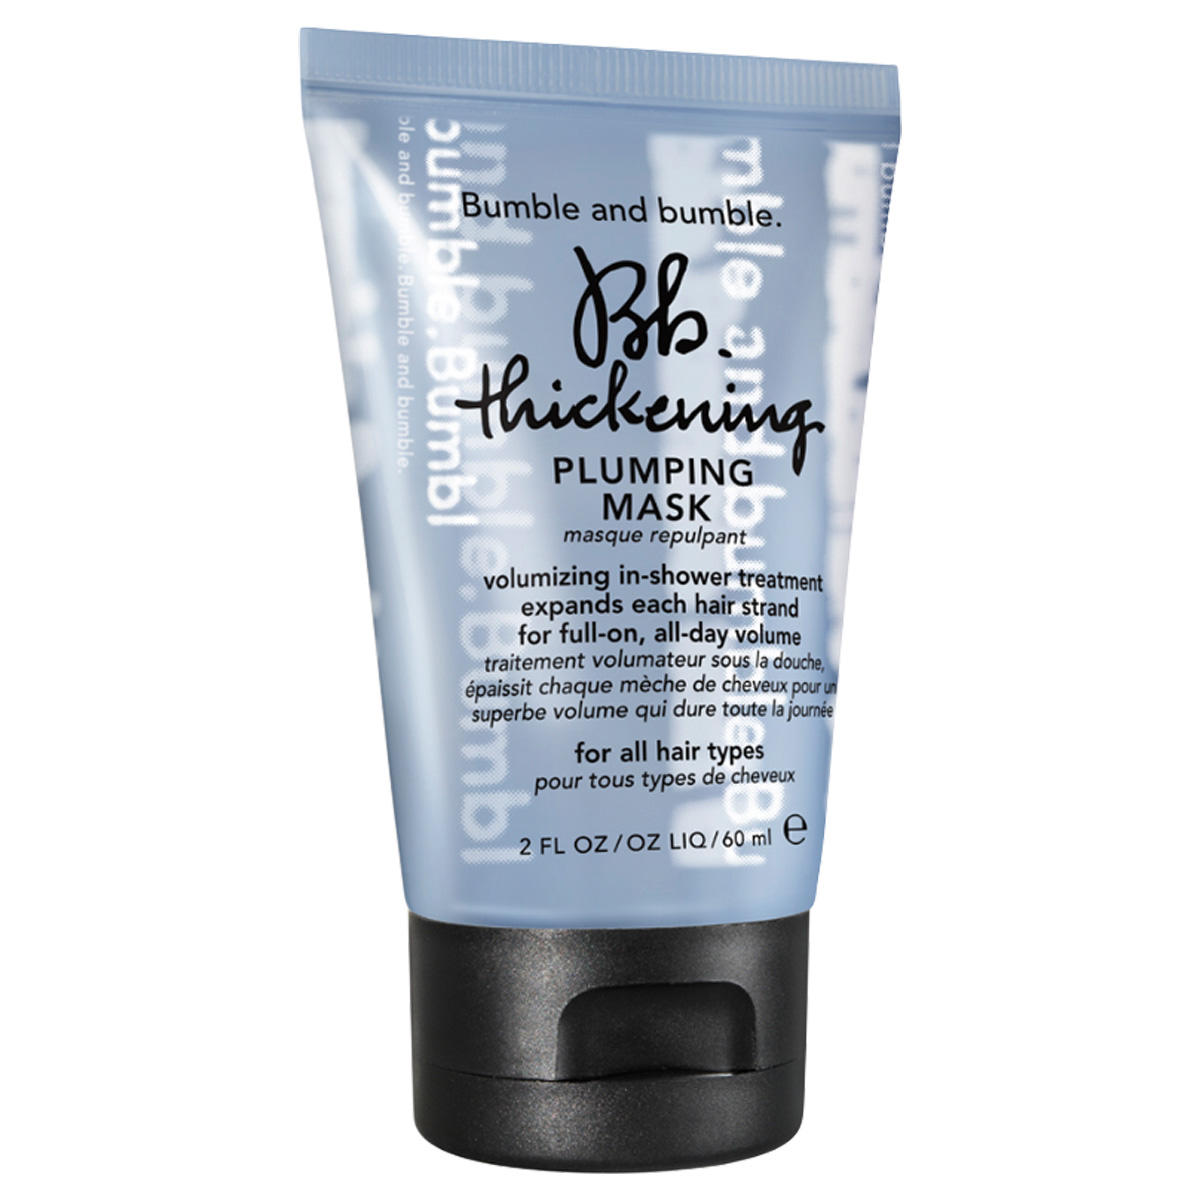 Bumble and bumble Bb. Thickening PLUMPING MASK 60 ml - 1